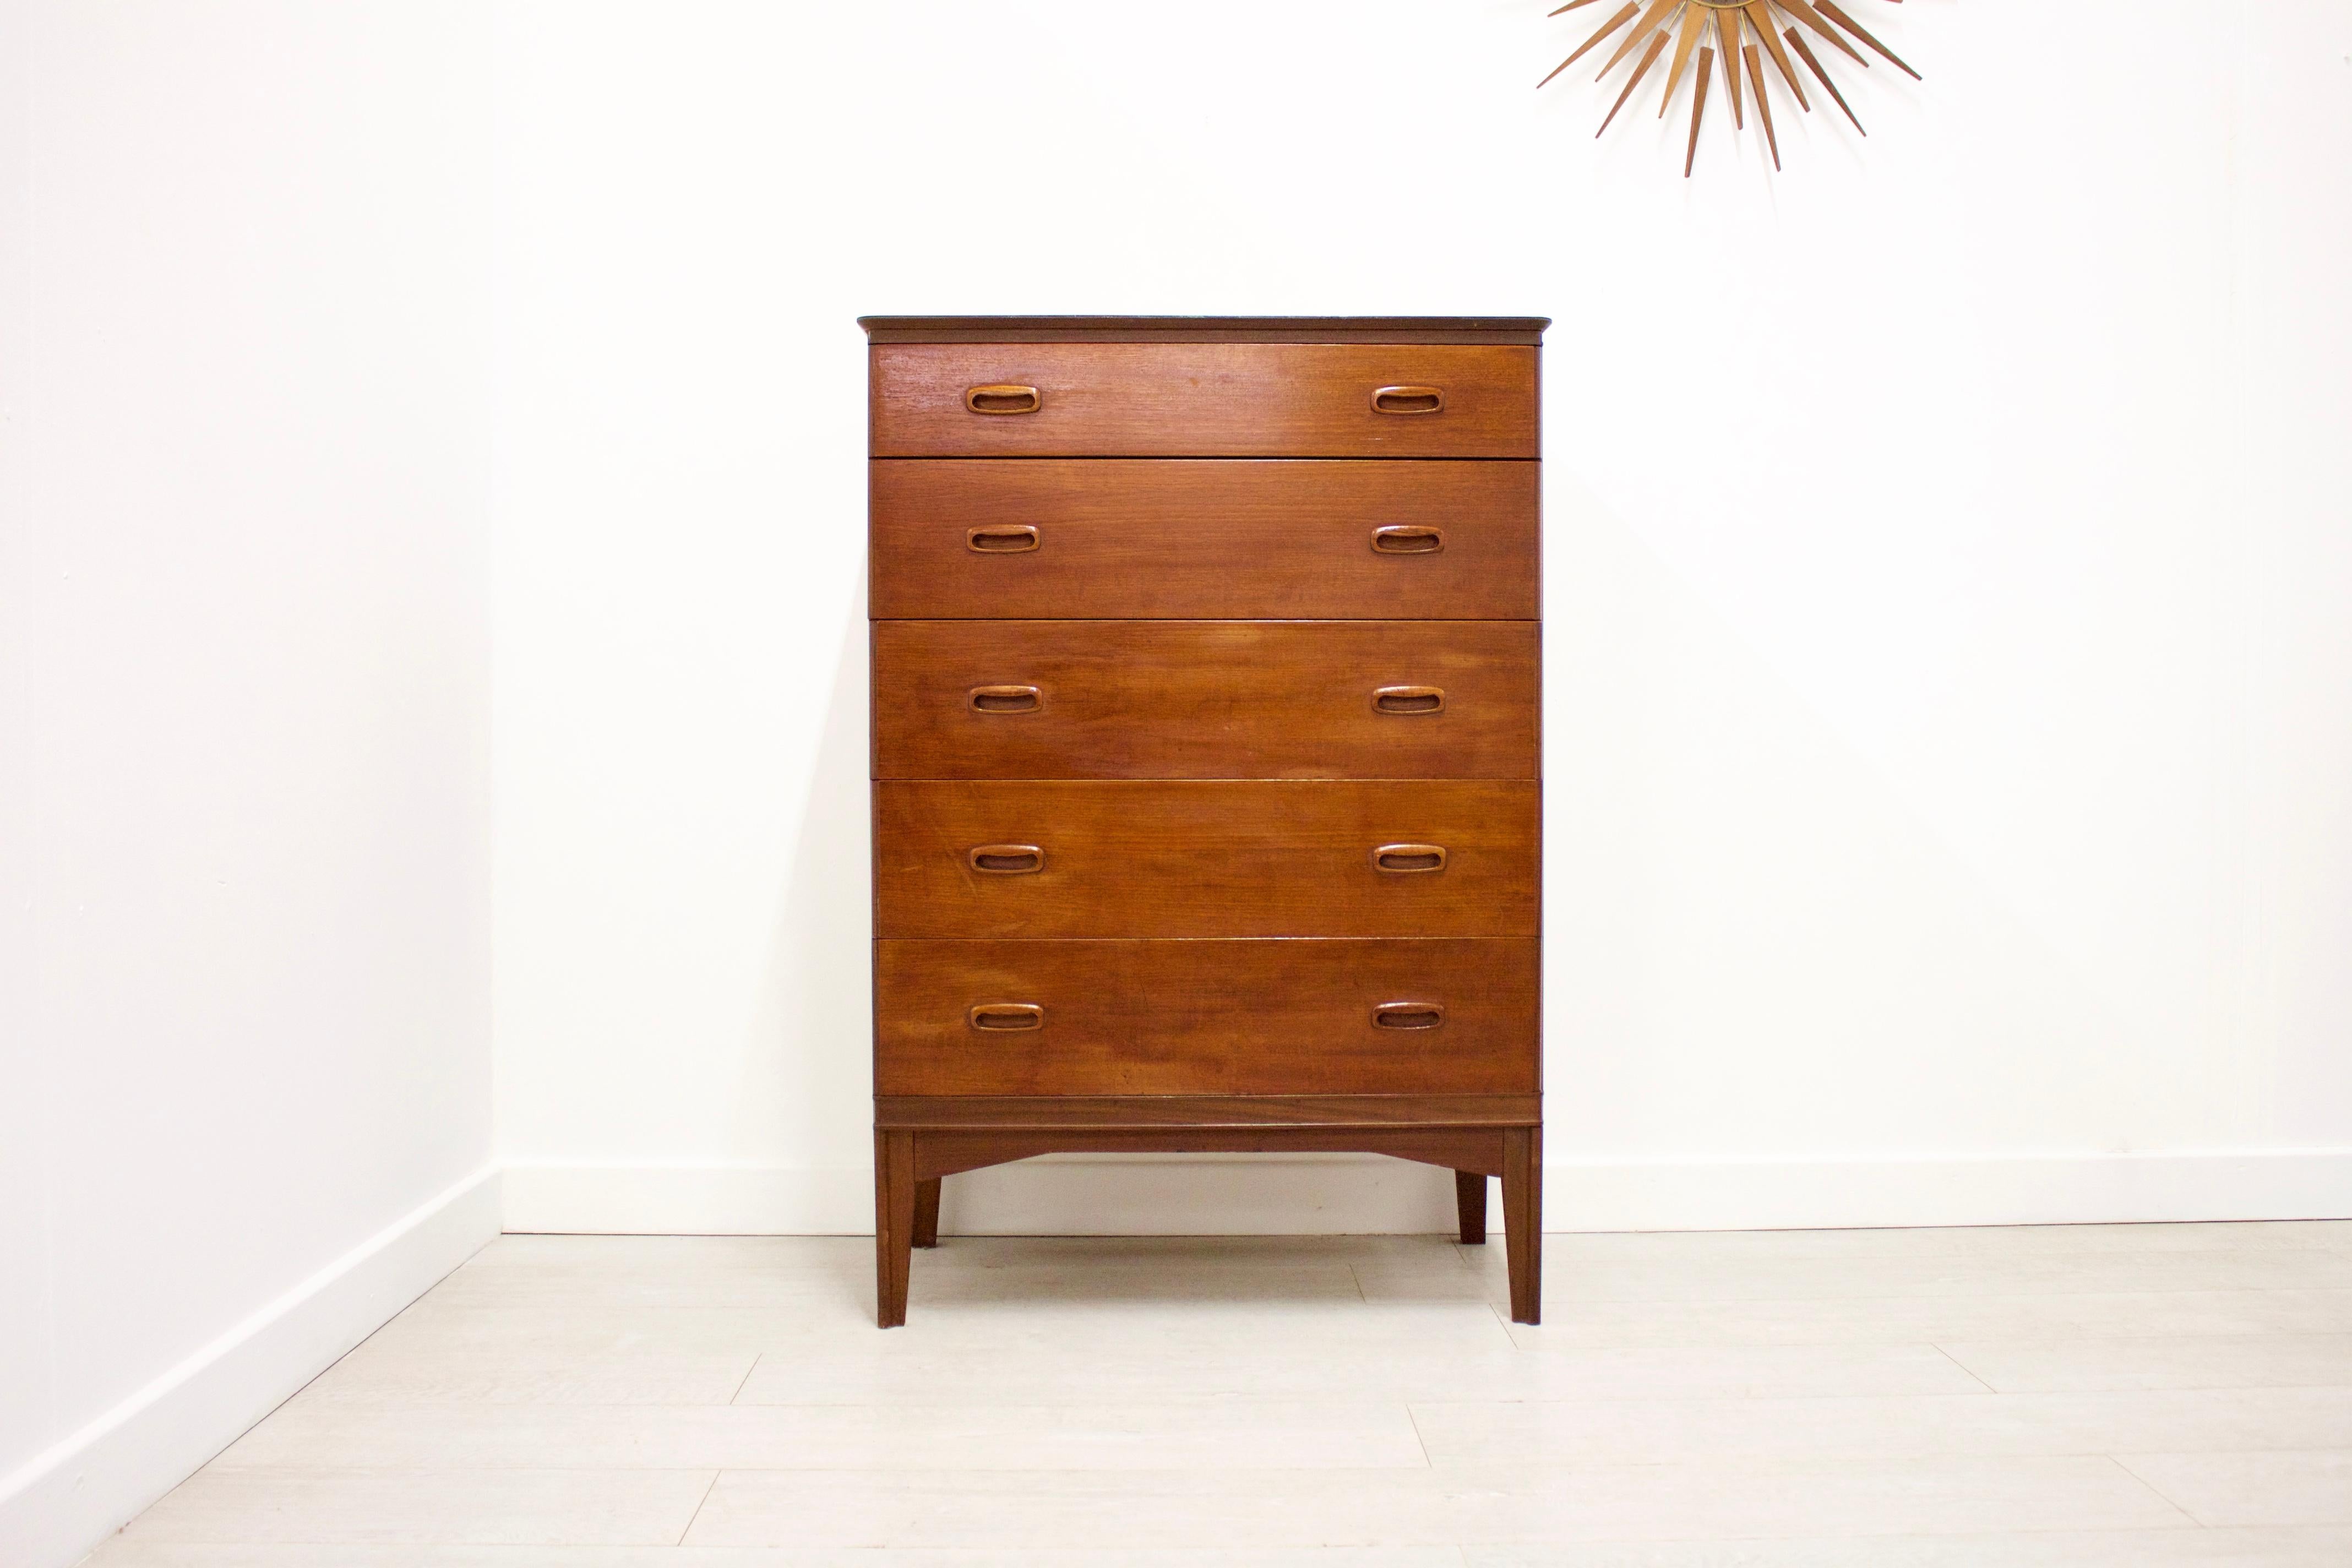 - Midcentury chest of drawers
- Manufactured in the UK by Austinsuite
- Made from teak and teak veneer.